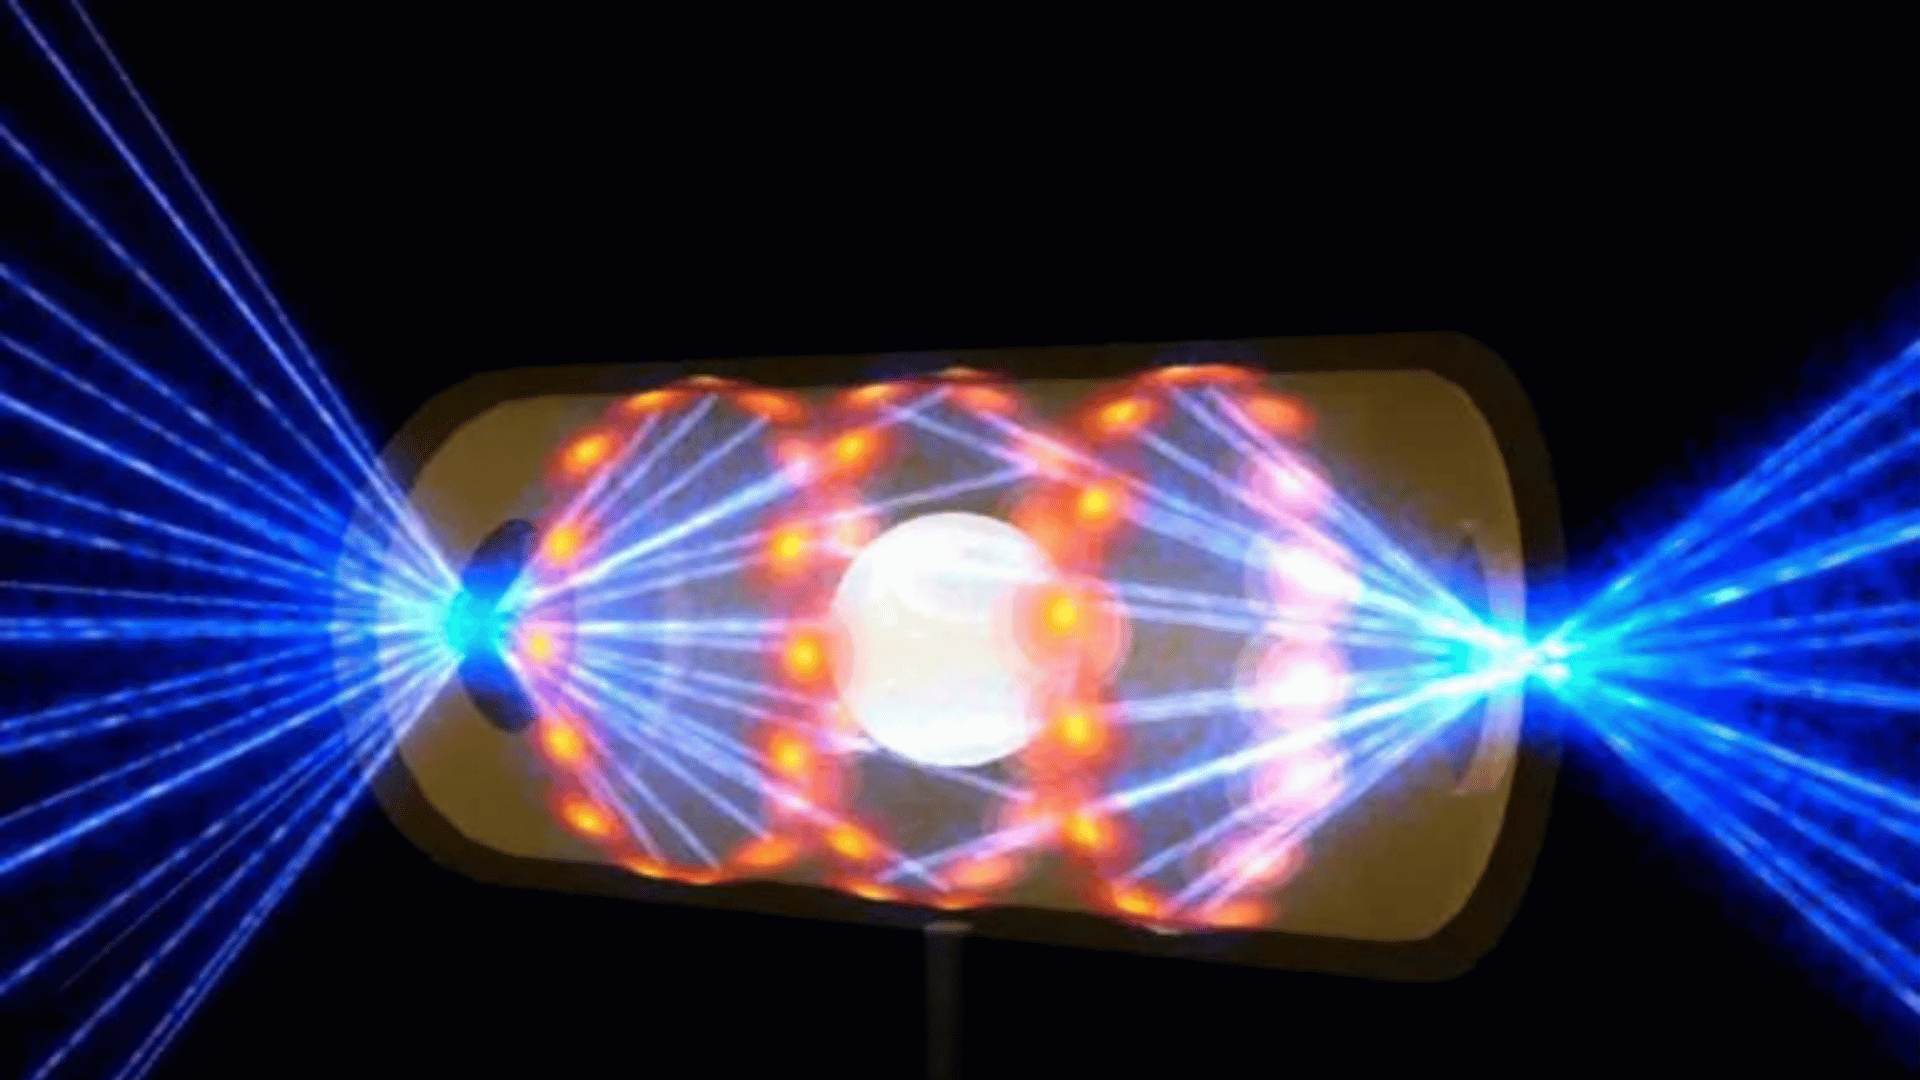 Illustration depicting a target pellet inside a hohlraum capsule with laser beams entering through openings on either end. The beams compress and heat the target to the necessary conditions for nuclear fusion to occur; Photo Credit: Handout: Lawrence Livermore National Laboratory via AP Photo